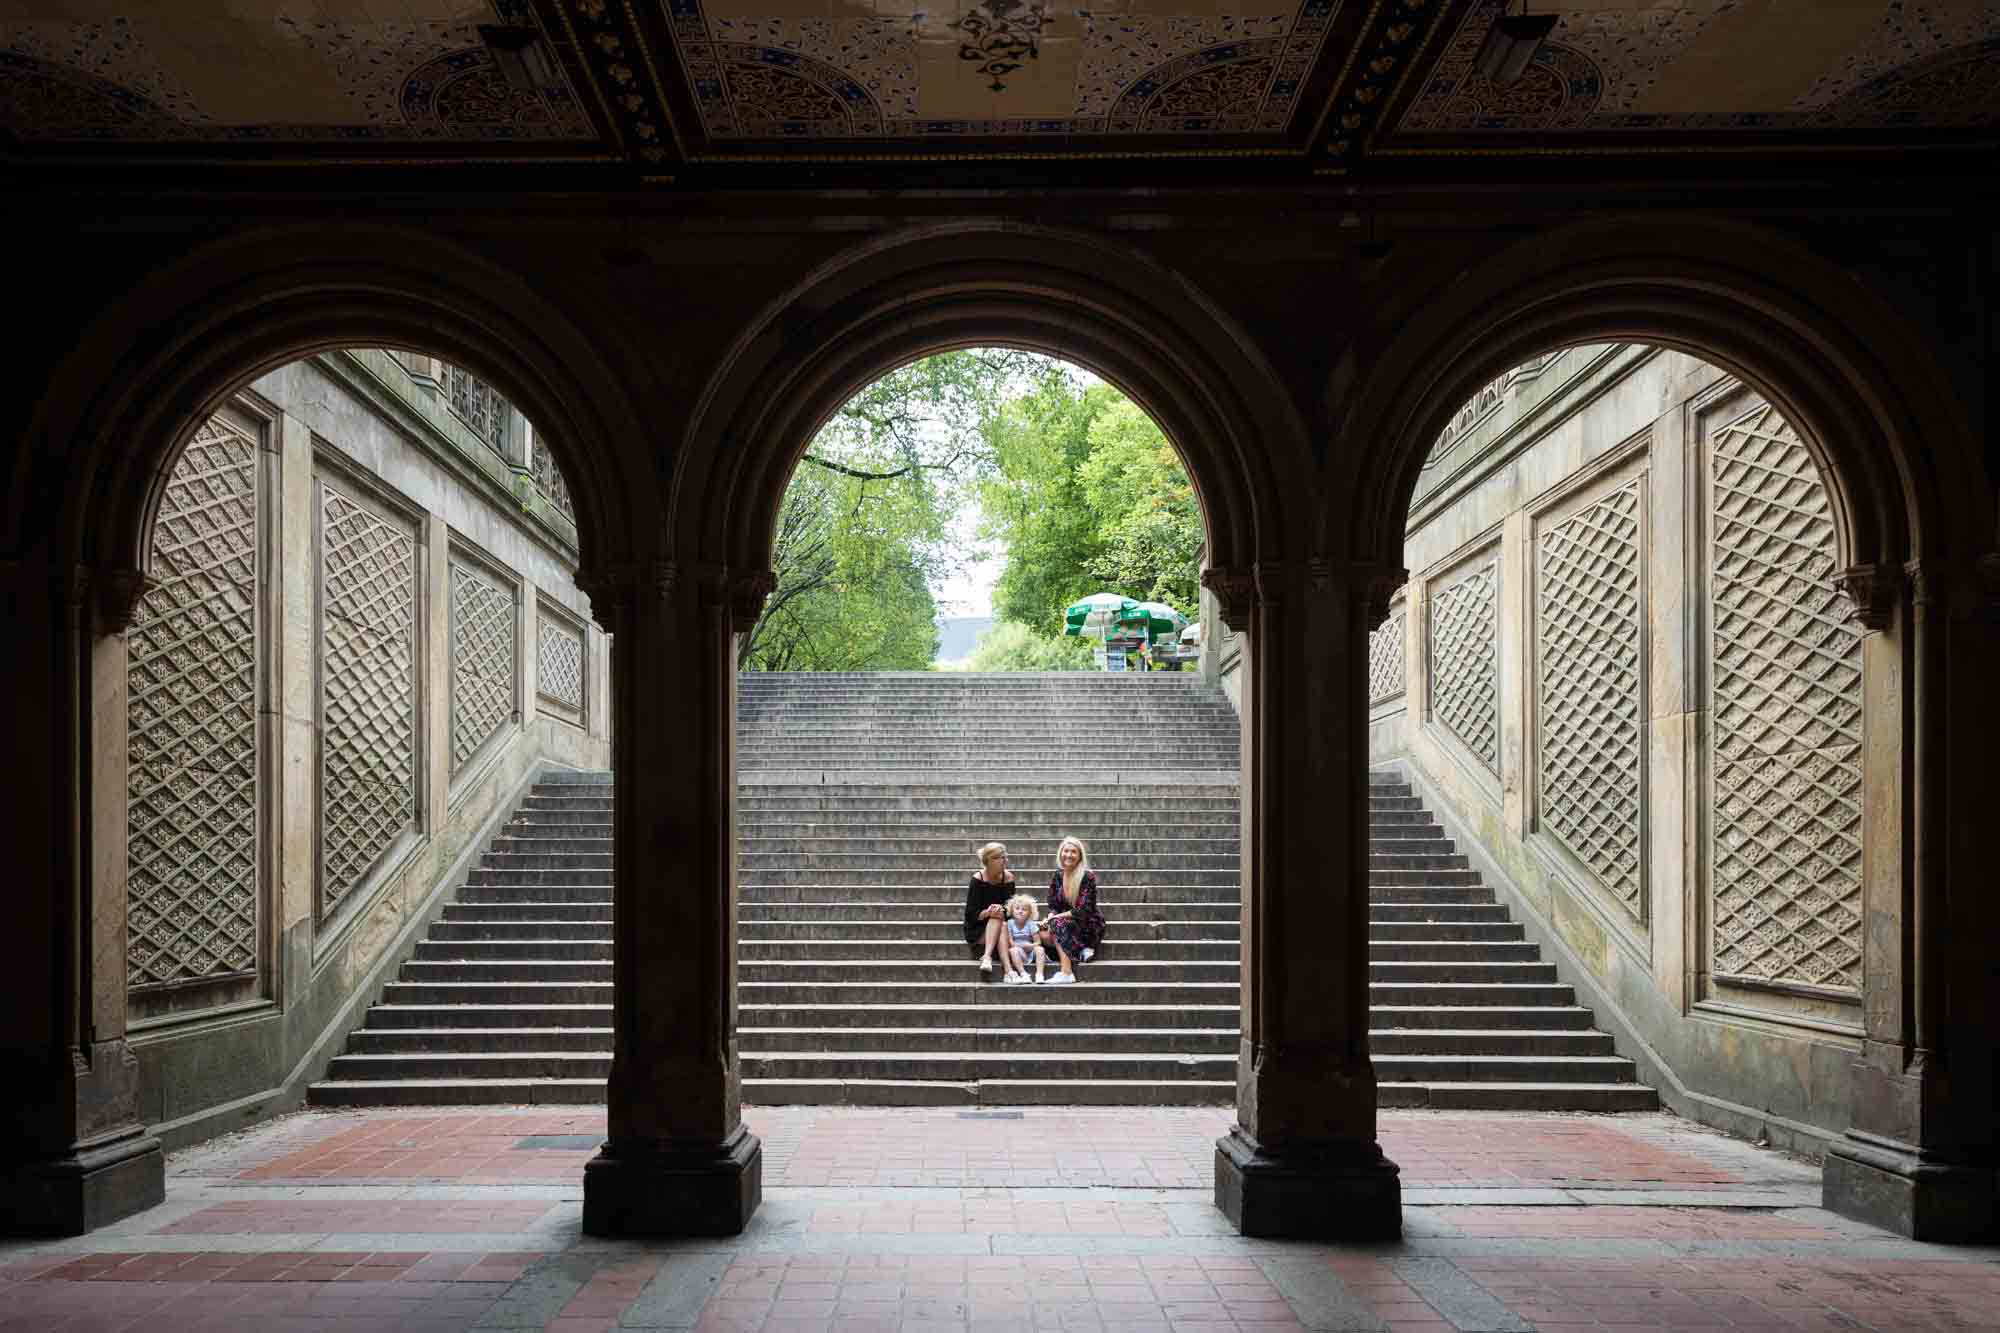 Mother, grandmother, and little girl sitting on steps in Bethesda Terrace for an article on NYC family portrait tips for tourists